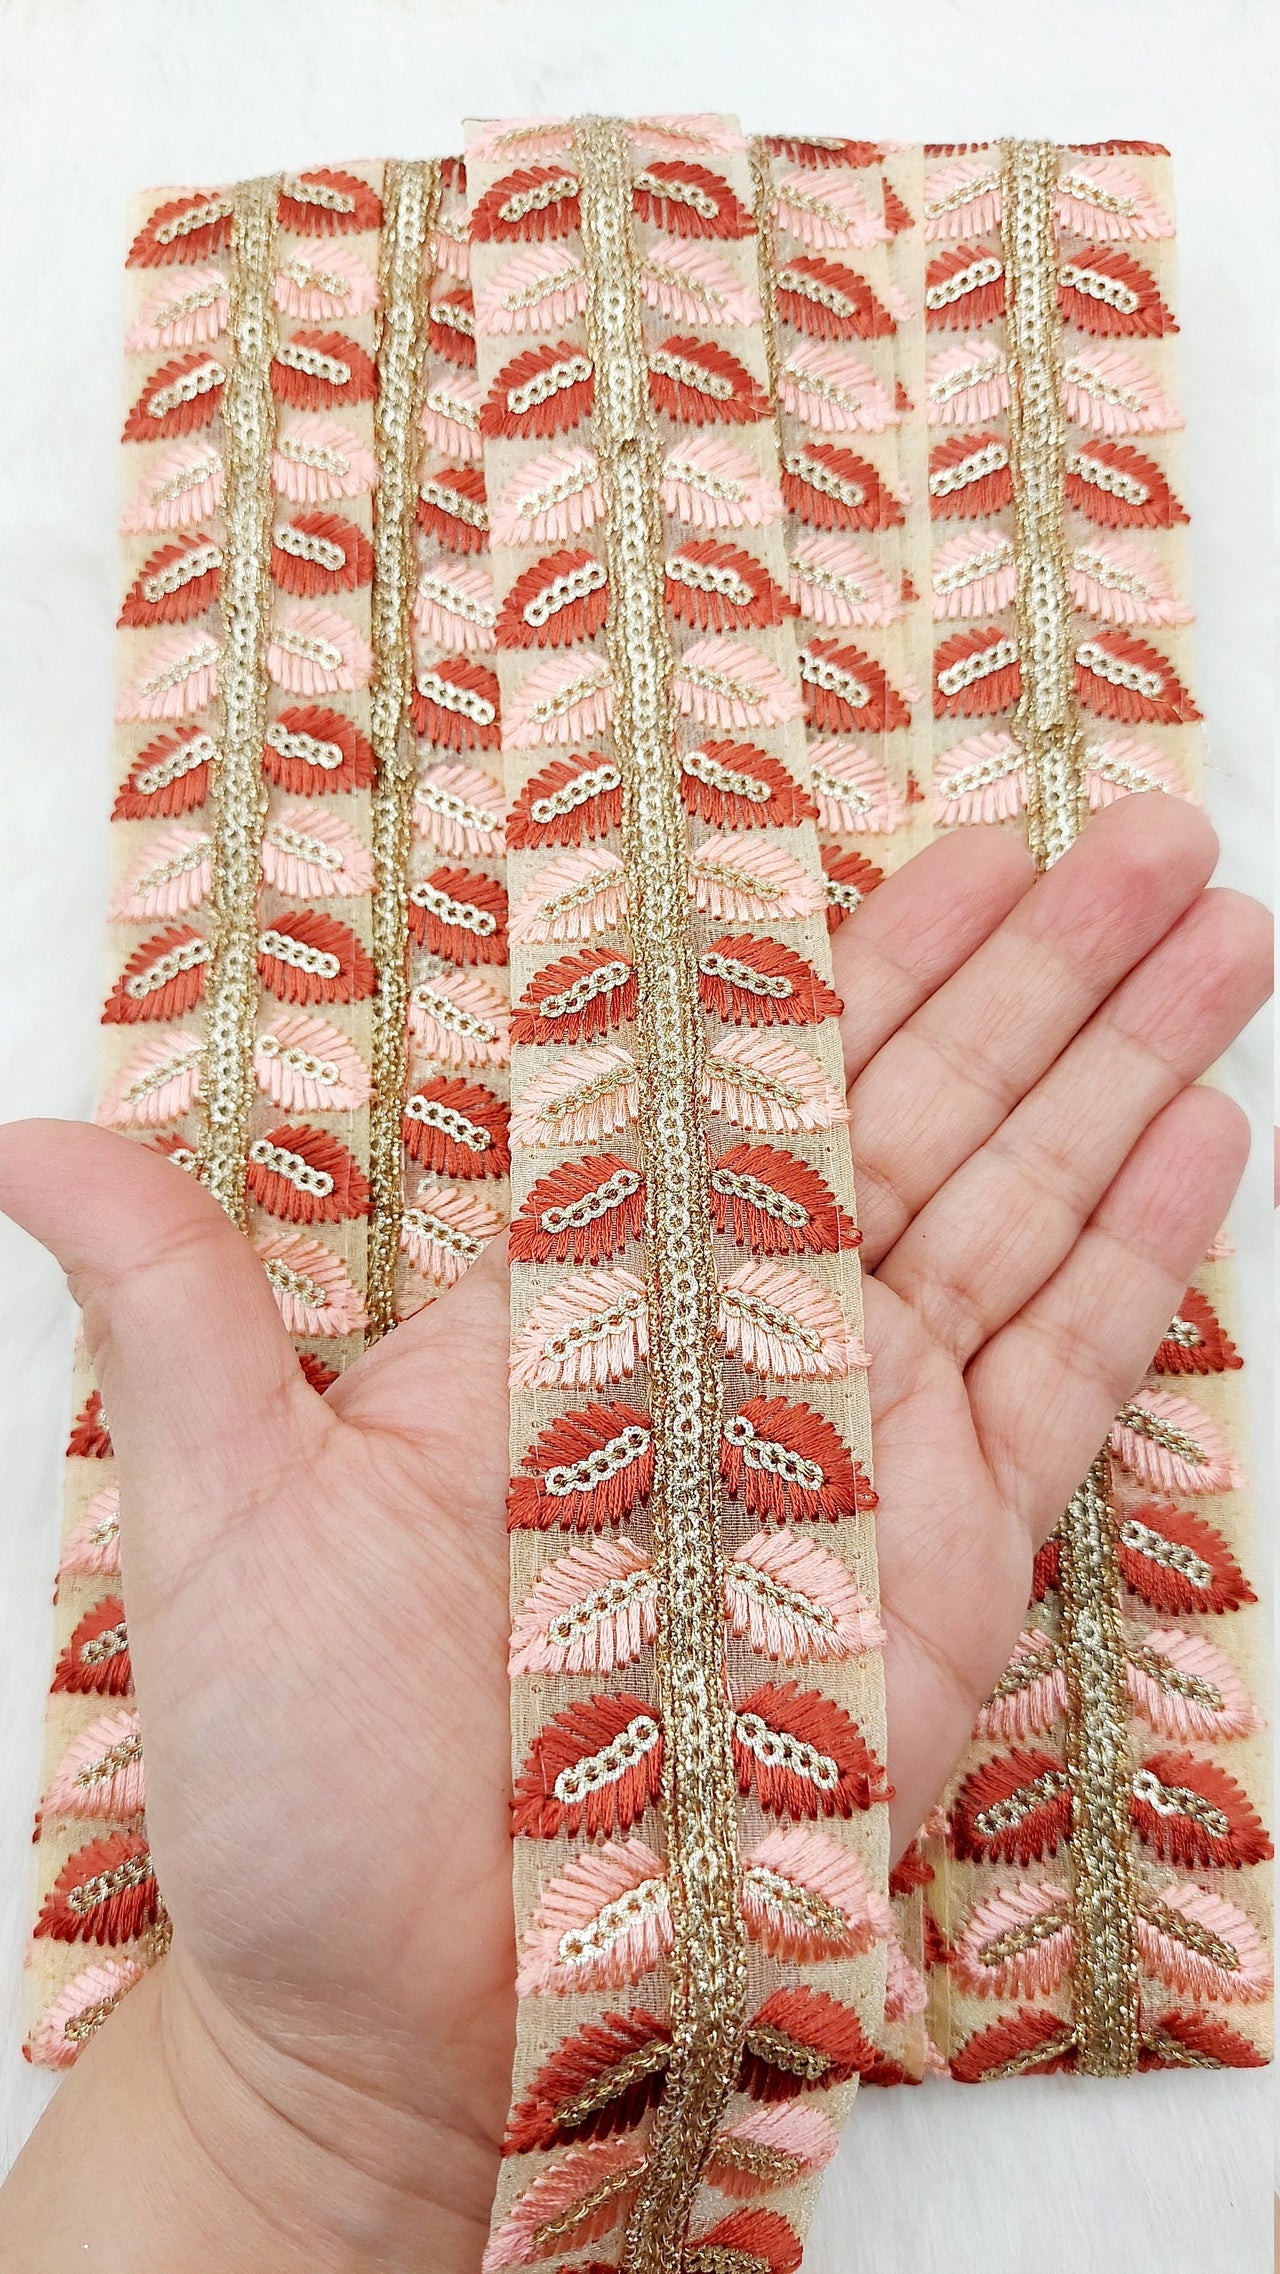 9 Yards Tissue Embroidered Trim, Leaves Embroidery Decorative Trim, Indian Sari Border